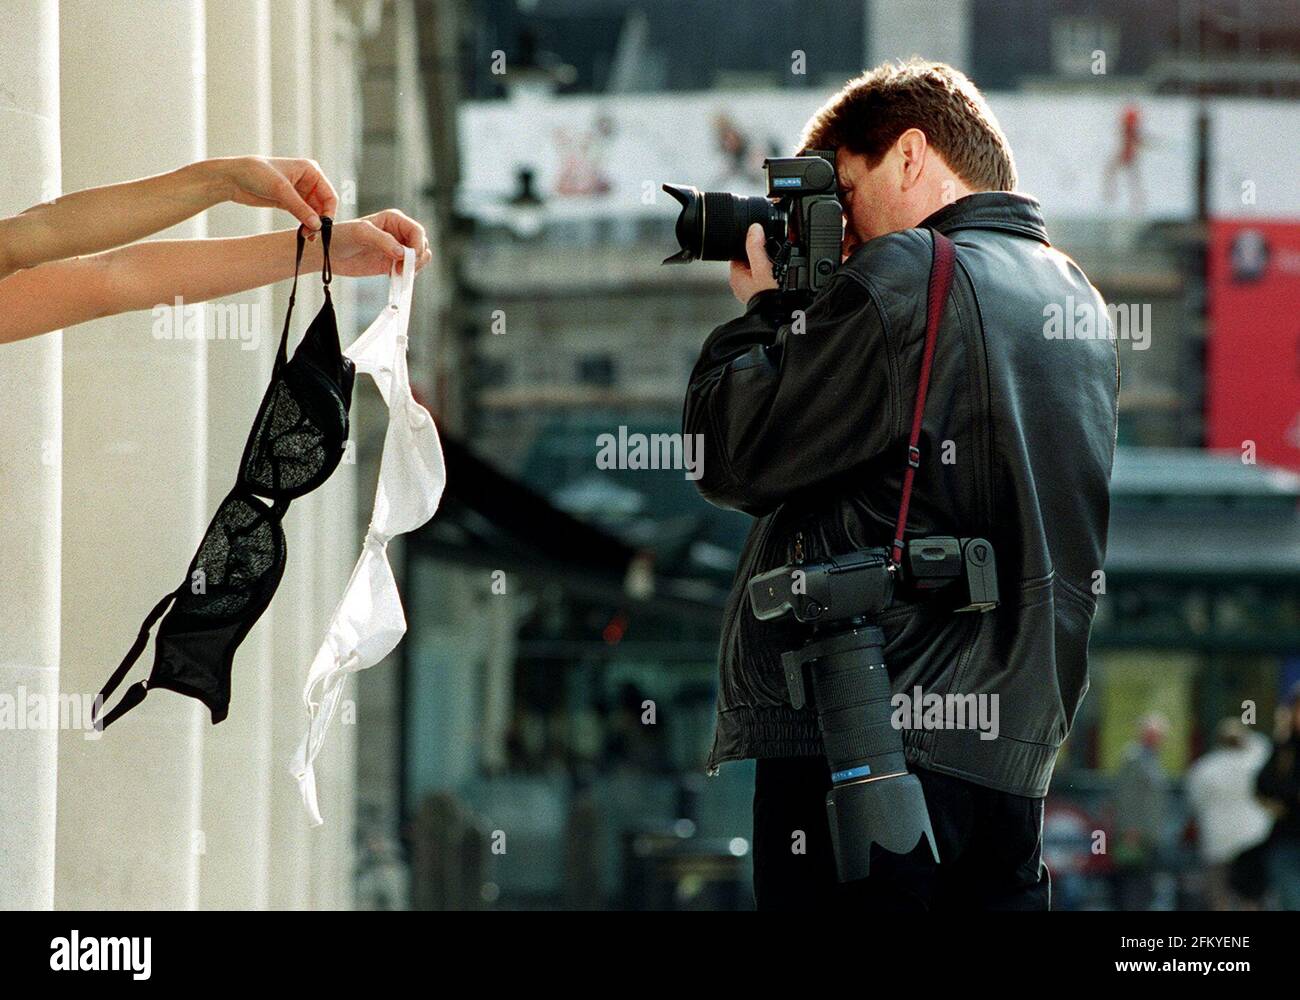 TWO GIRLS MODEL THE NEW BIOFORM BRA FROM CHARNOS CREATED BY DESIGNERS  SEYMOUR POWELL. THE DESIGN OF THE BRA WILL APPARENTLY REVOLUTIONISE THE WAY  BRAS HAVE BEEN PREVIOUSLY MADE Stock Photo - Alamy